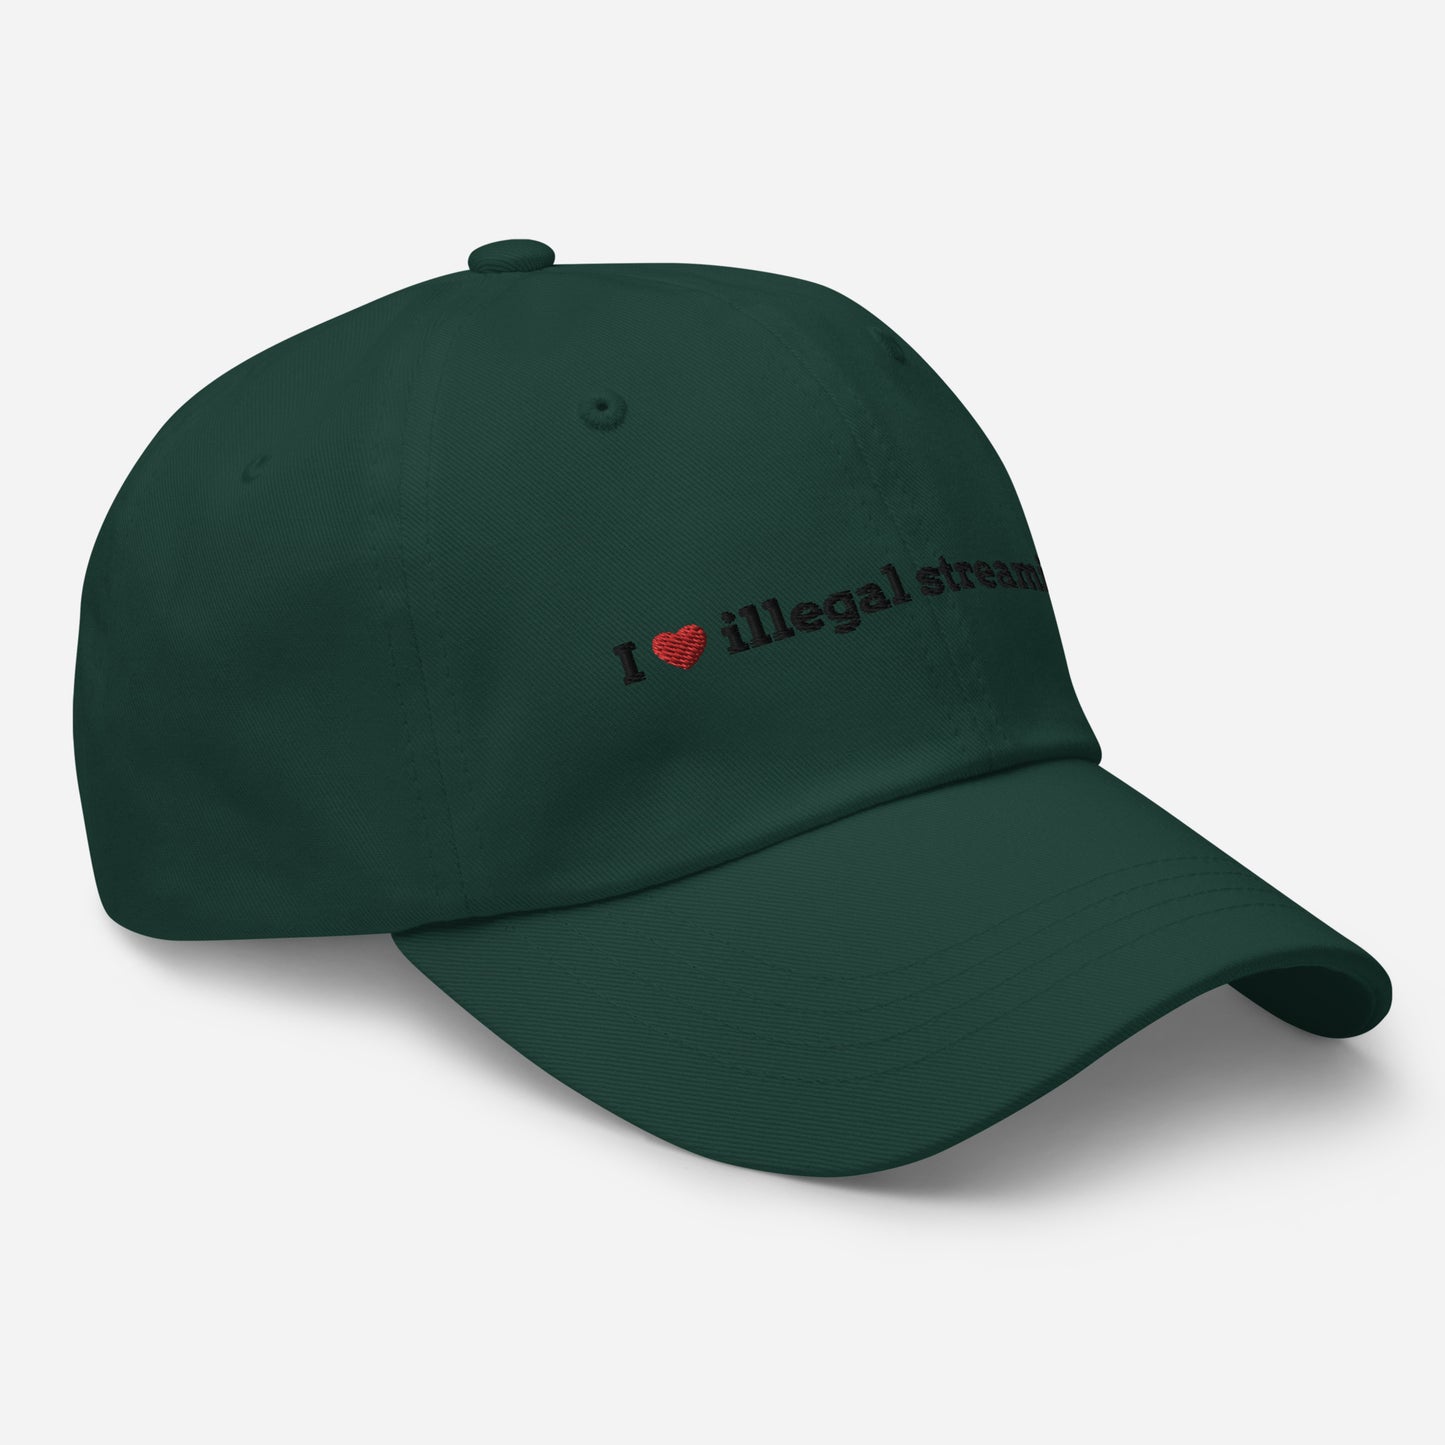 I heart illegal streaming Dad hat